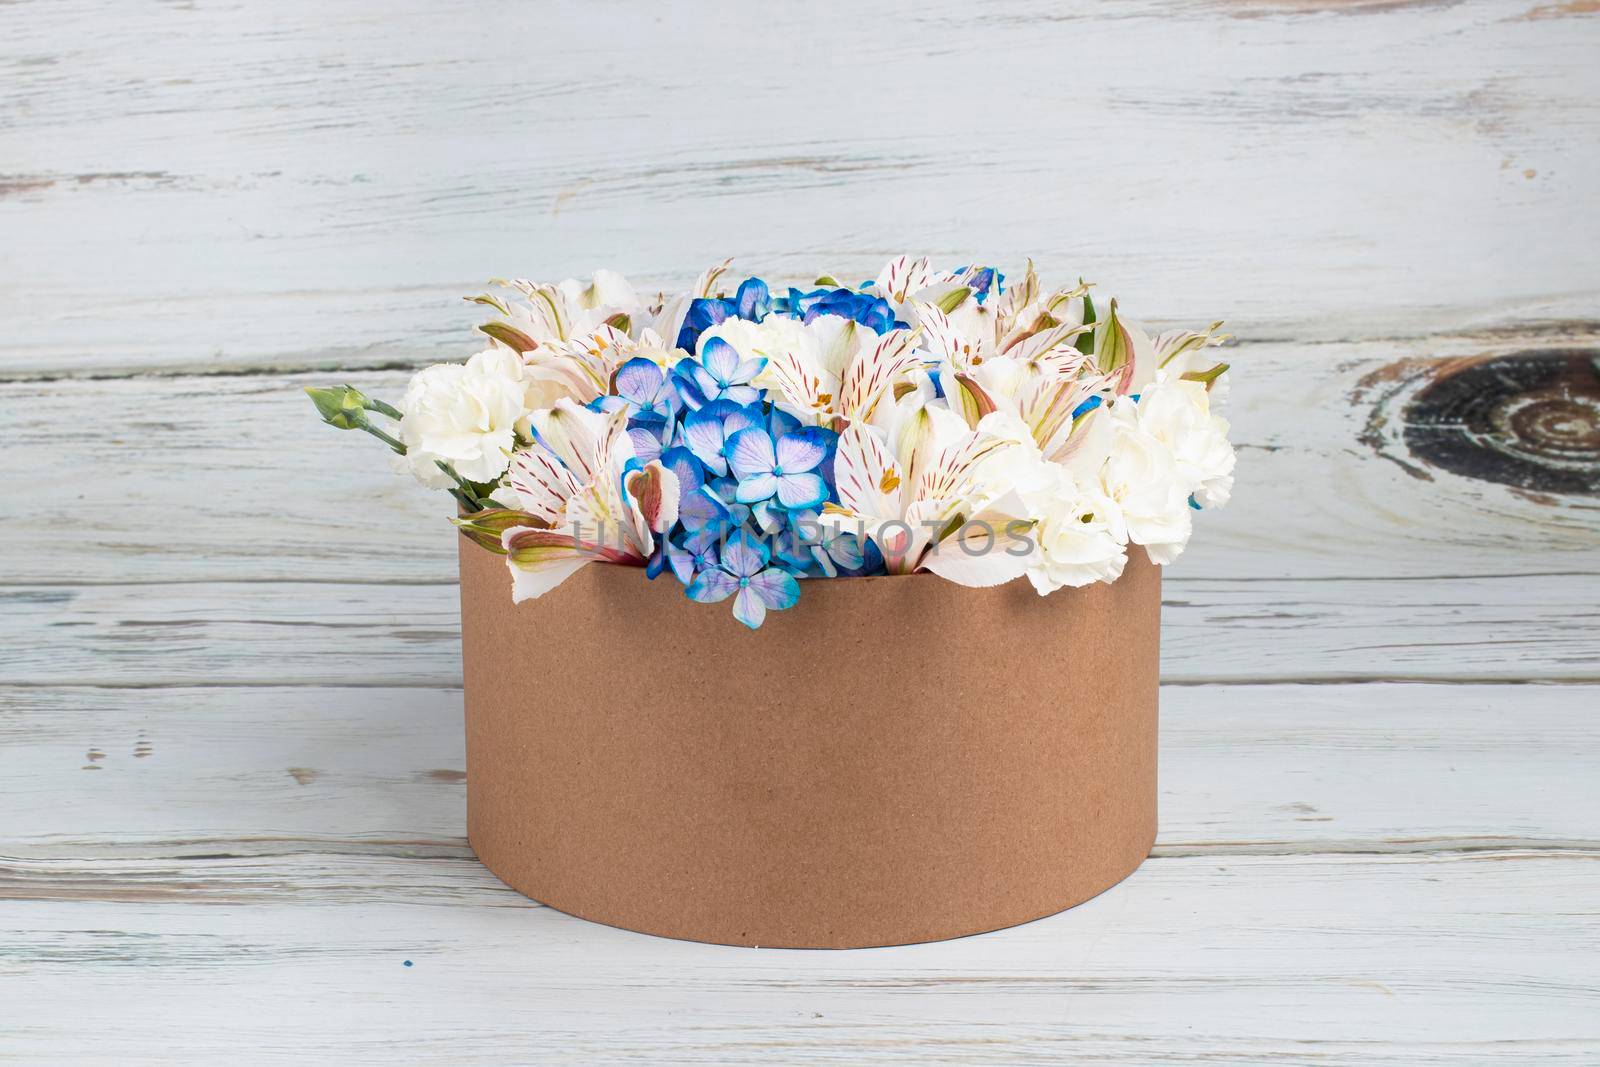 Floral arrangement with blue hydrangeas in recyclable cardboard box by eagg13